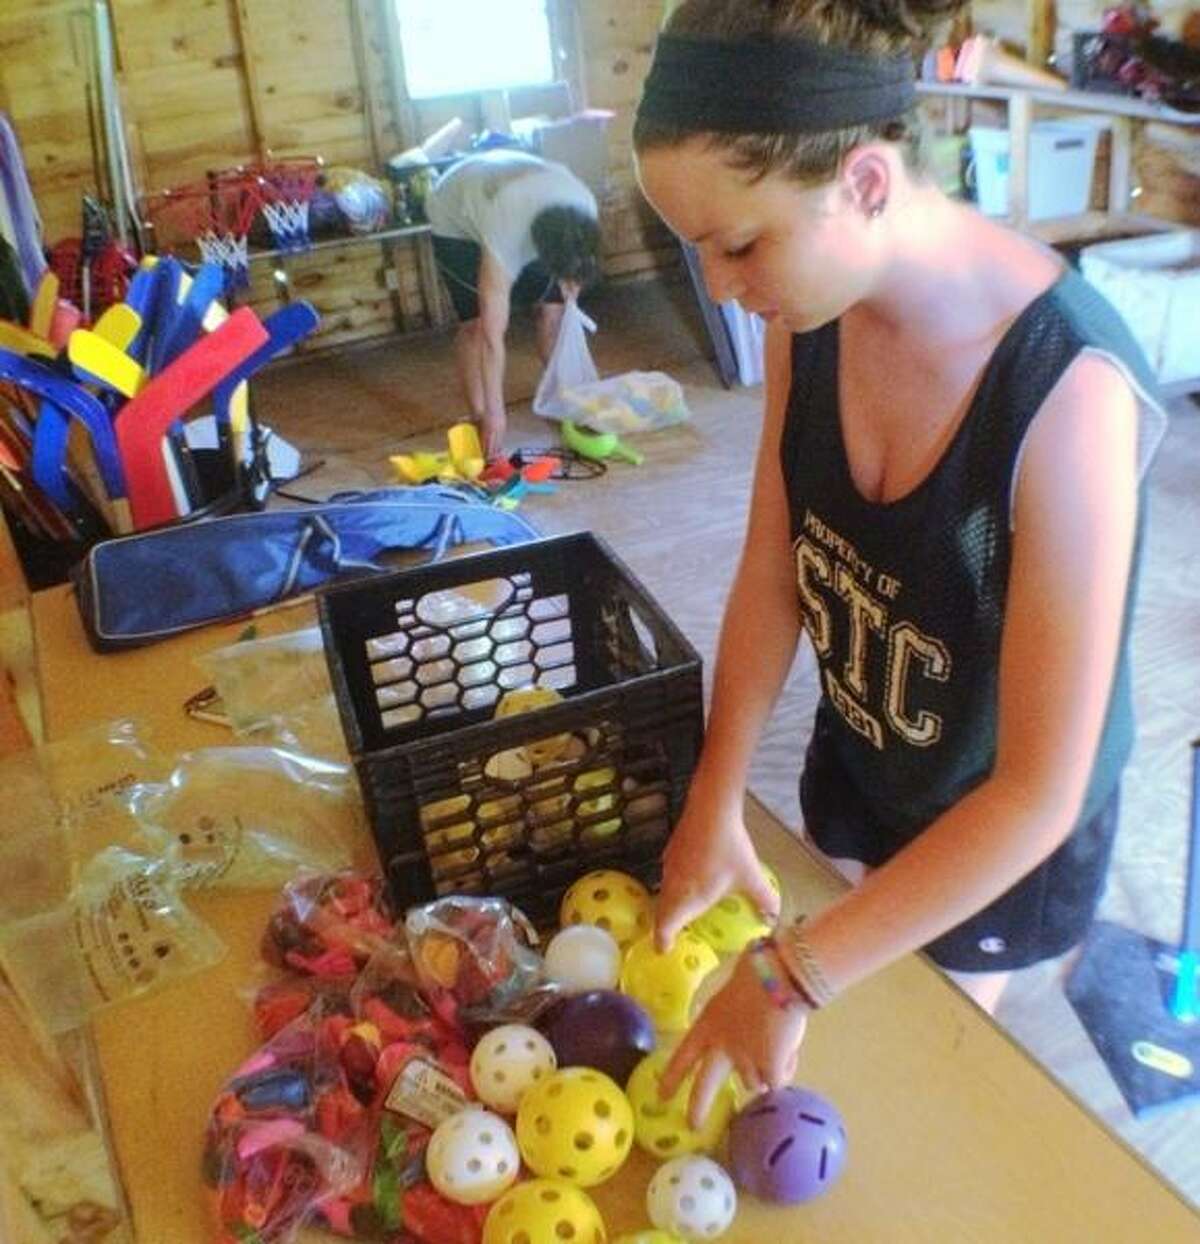 JOHN HAEGER @ONEIDAPHOTO ON TWITTER/ONEIDA DAILY DISPATCH Kelli Vachon works to inventory sports equipment at Madison County Childrens Camp Camp Lookout on Monday, June 24, 2013.